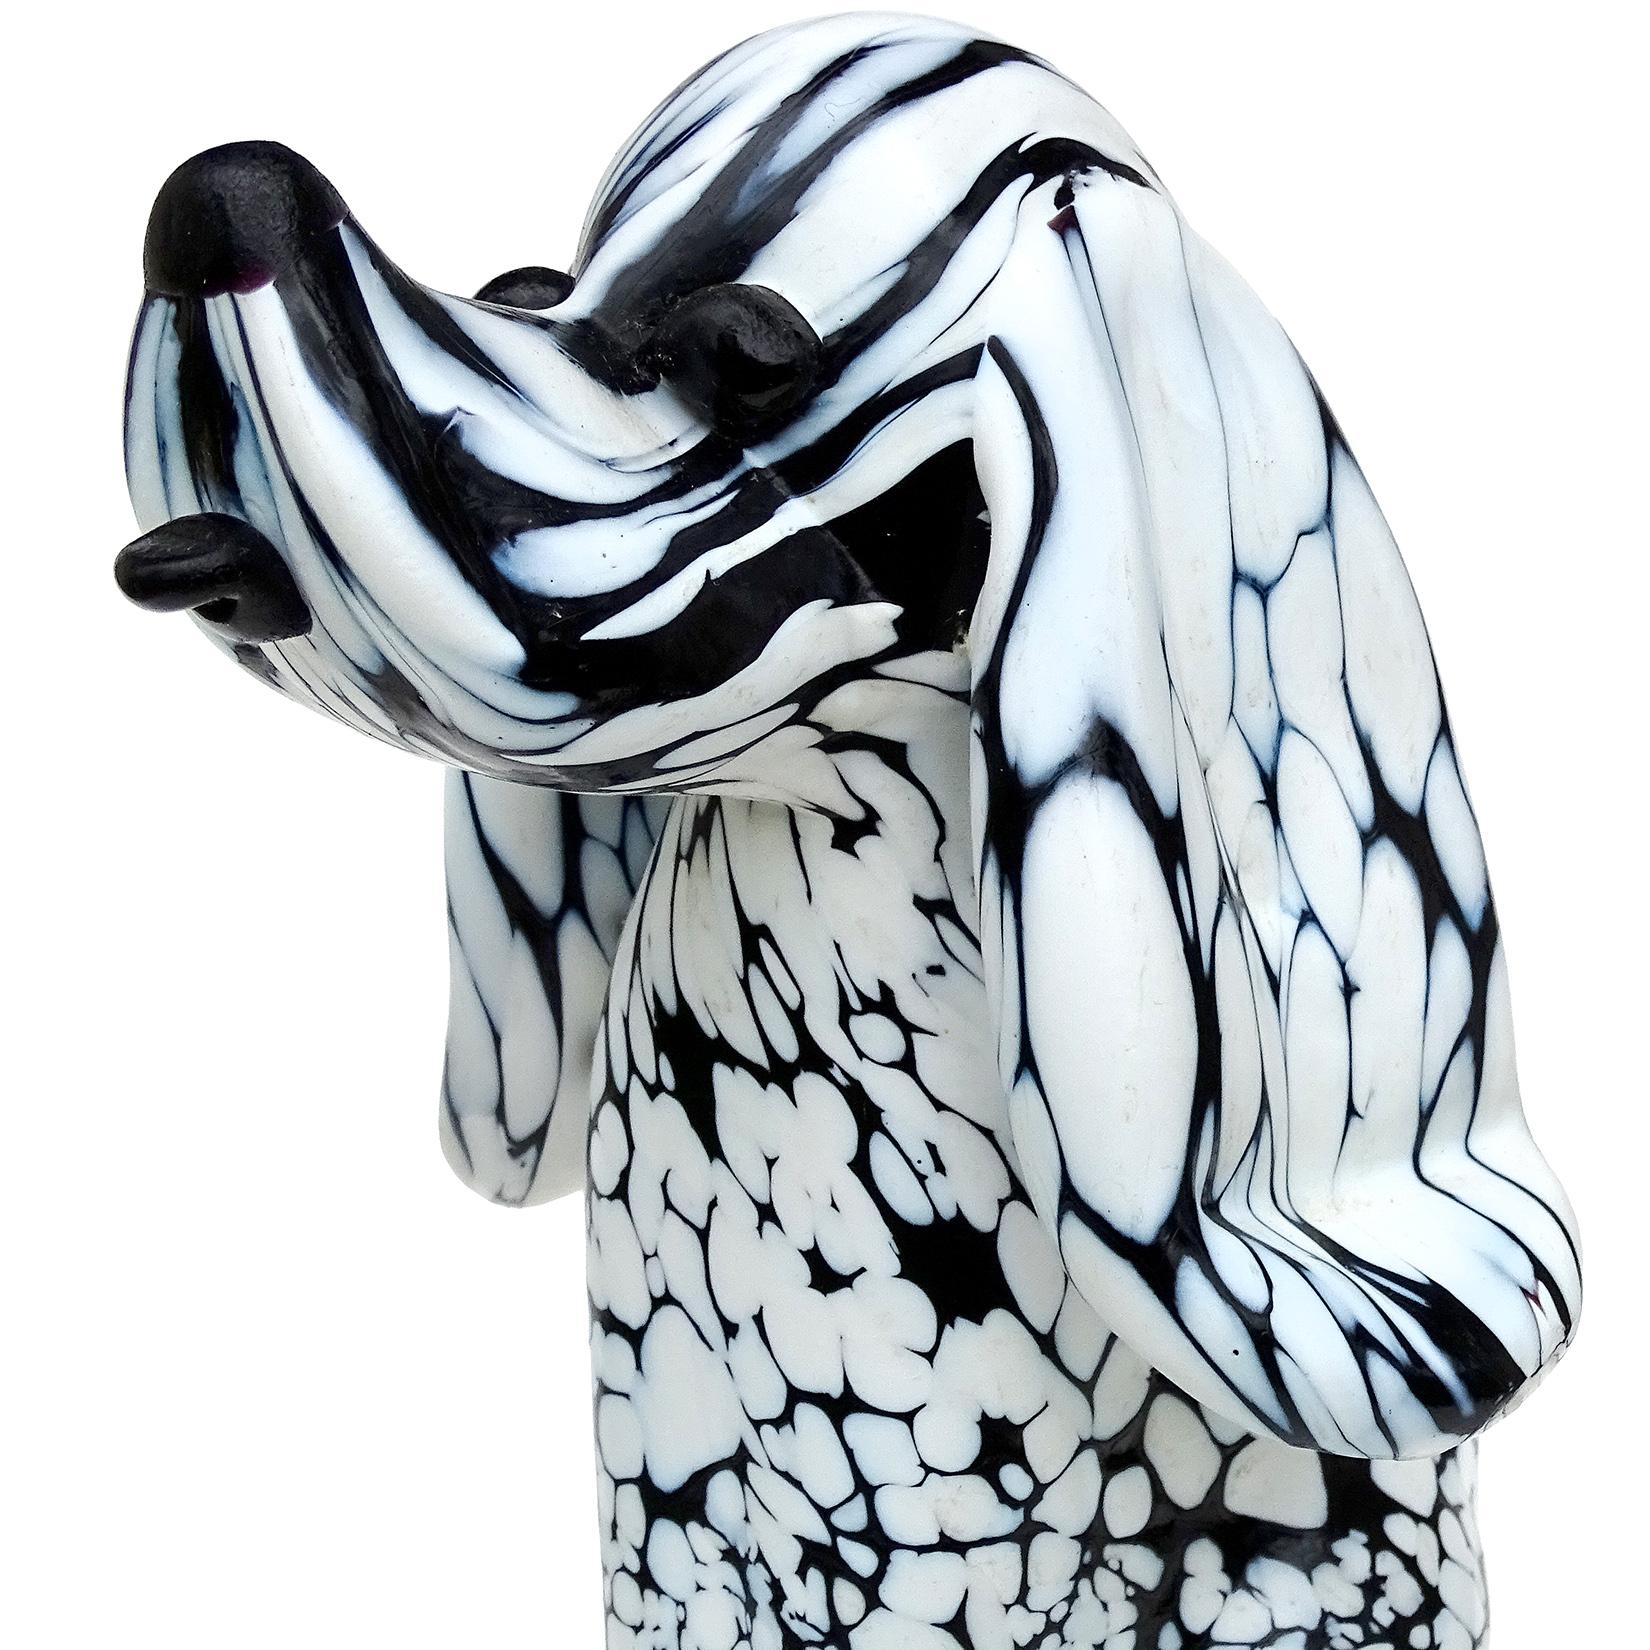 Beautiful, and rare, vintage Murano hand blown black and white spotted Italian art glass puppy dog sculpture. Documented to designer Archimede Seguso, from the 